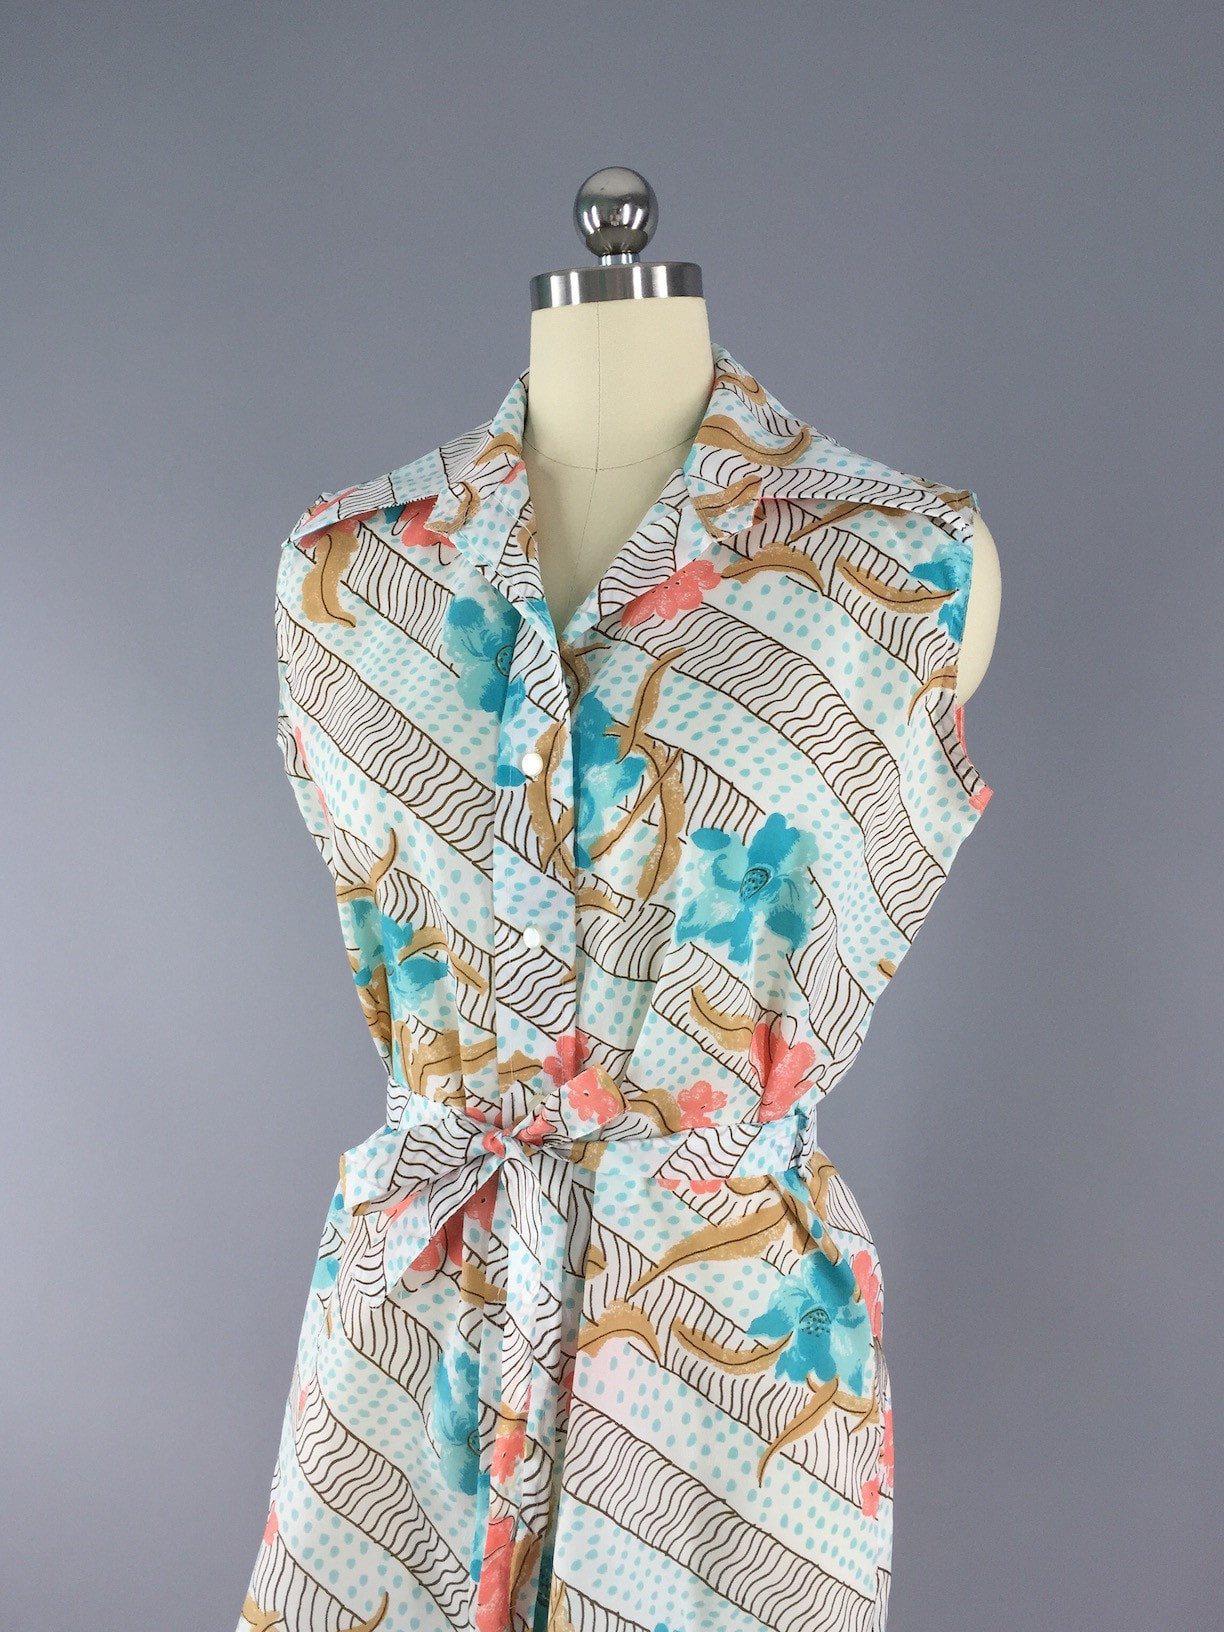 Vintage Summer Blouse / 1960s Floral Print - ThisBlueBird